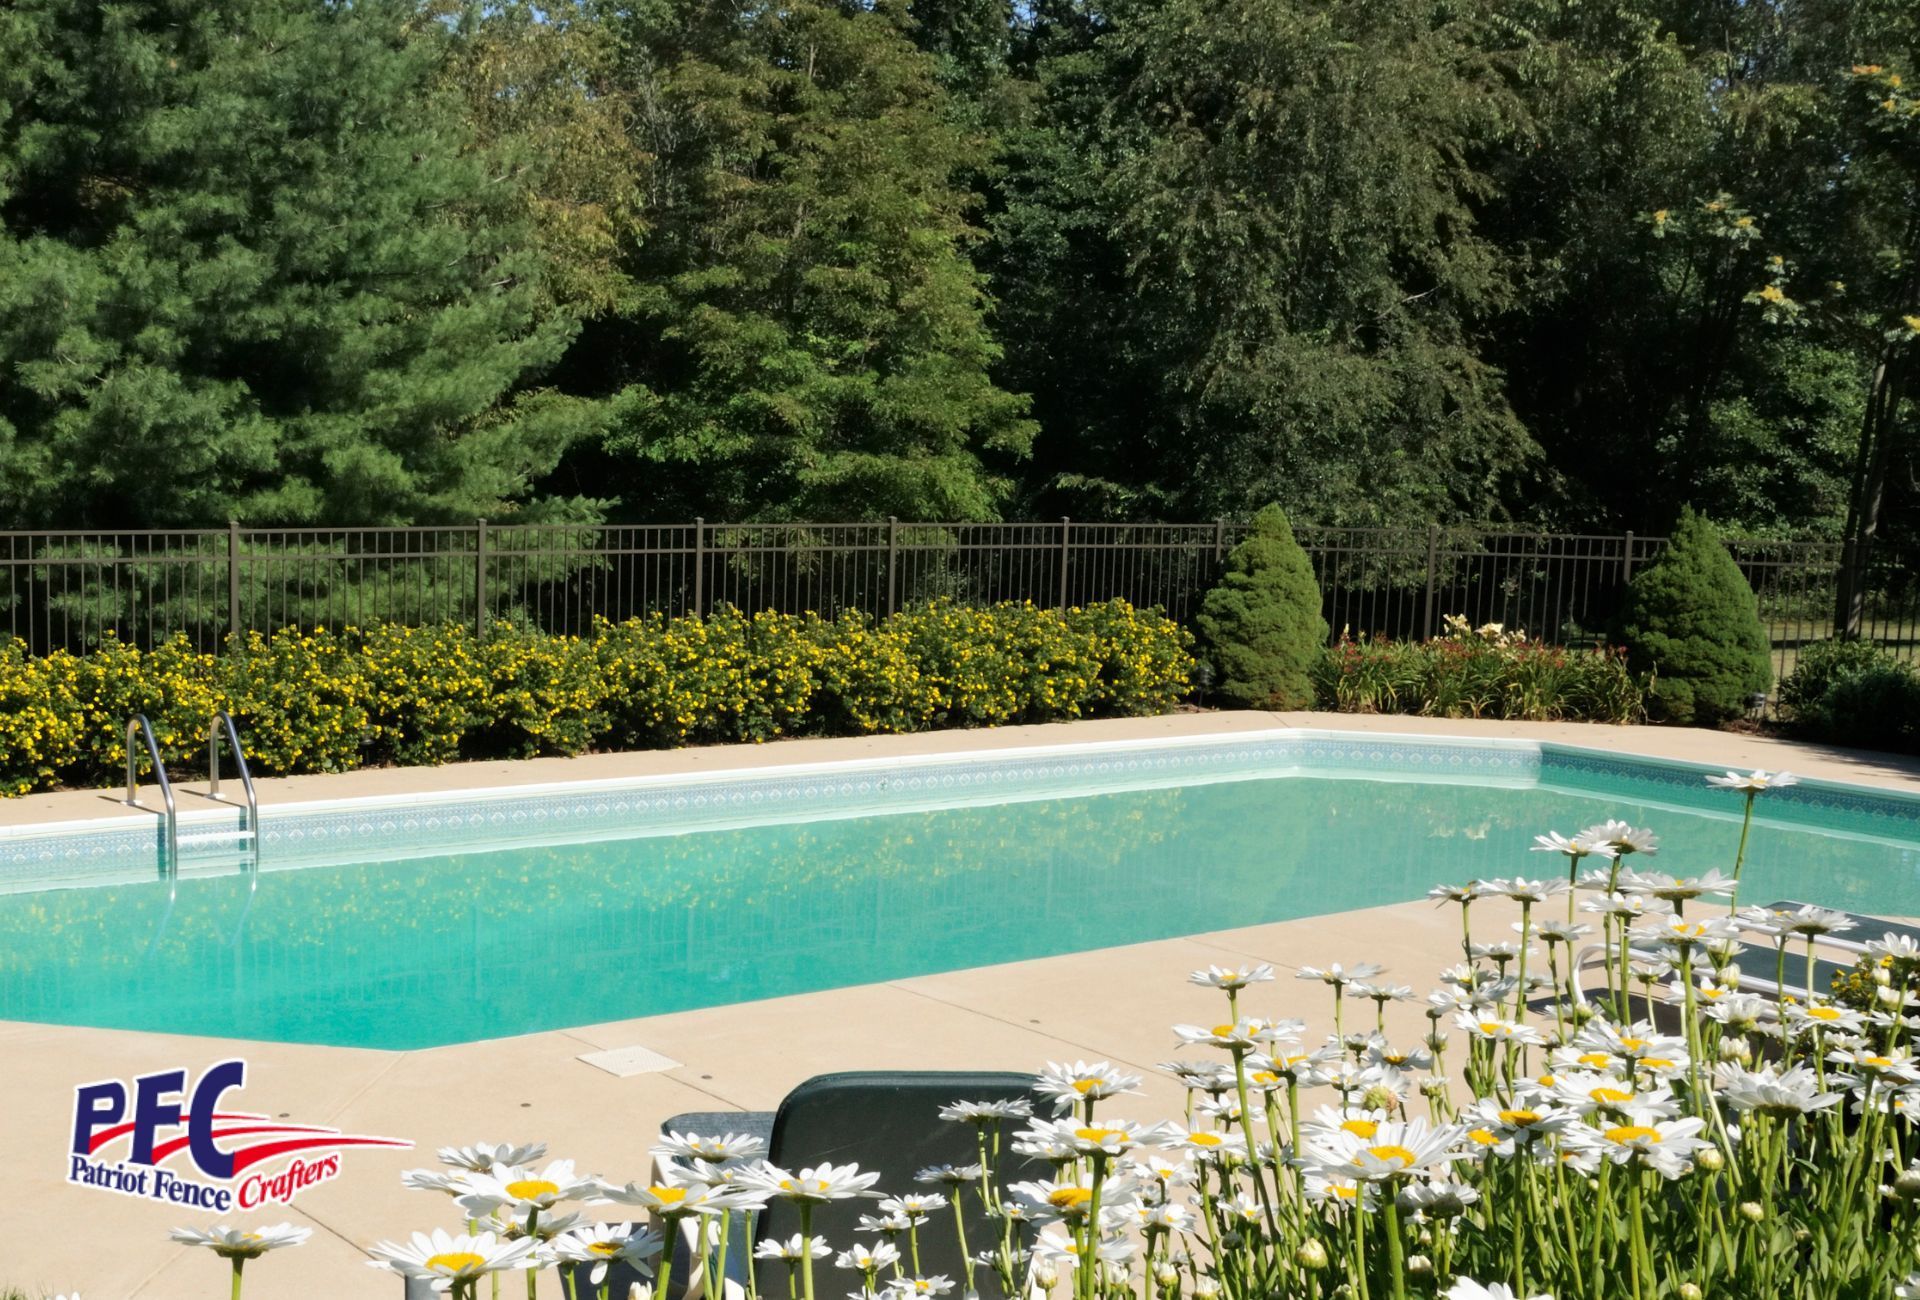 The Essential Guide to Fencing Your Pool Area: Safety, Privacy and Regulations